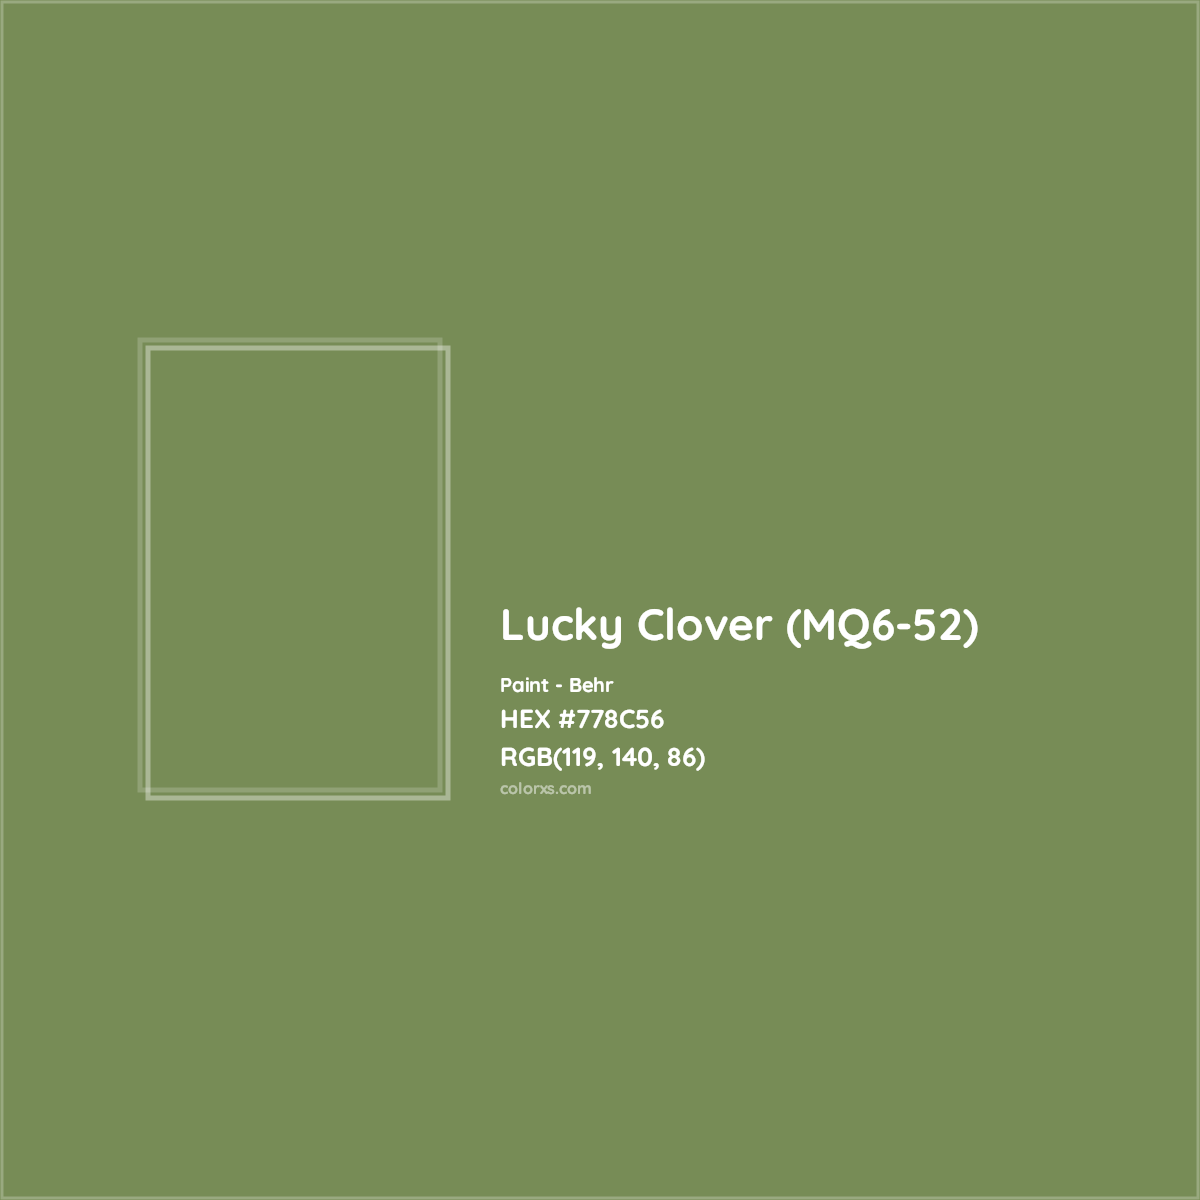 HEX #778C56 Lucky Clover (MQ6-52) Paint Behr - Color Code